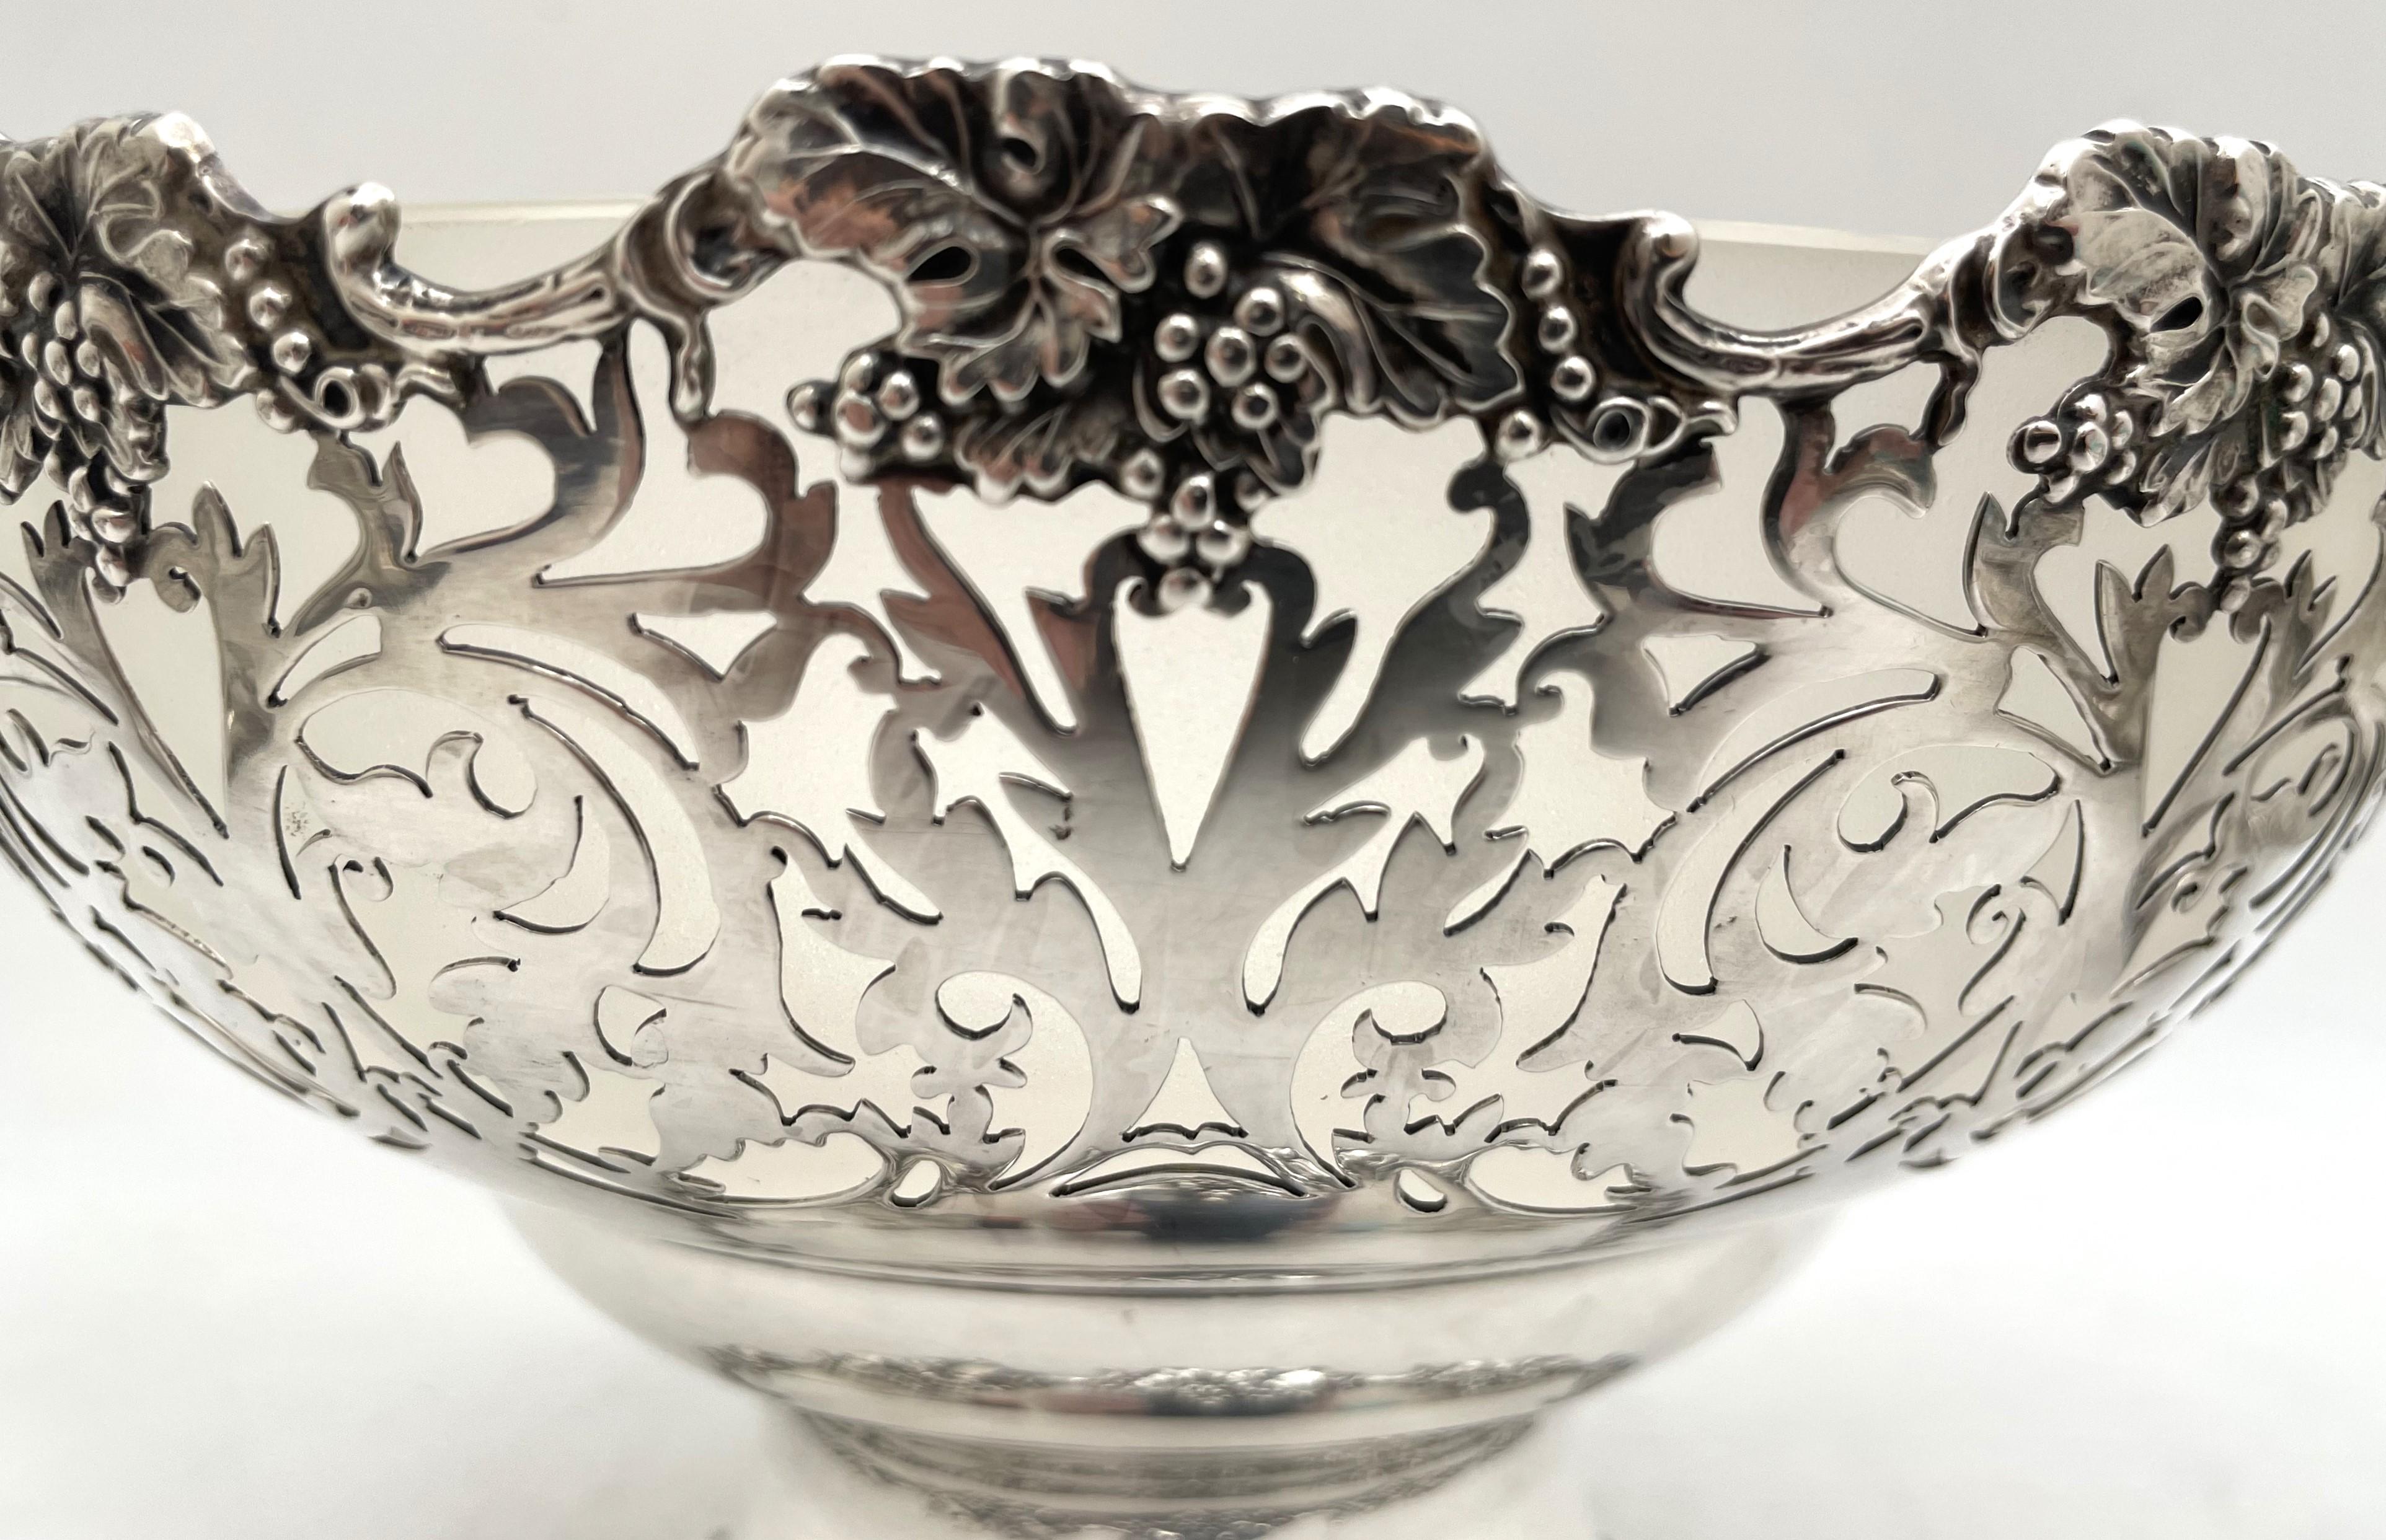 Walker & Hall English Sterling Silver & Glass 1930 Punch Bowl Set with 4 Cups In Good Condition For Sale In New York, NY